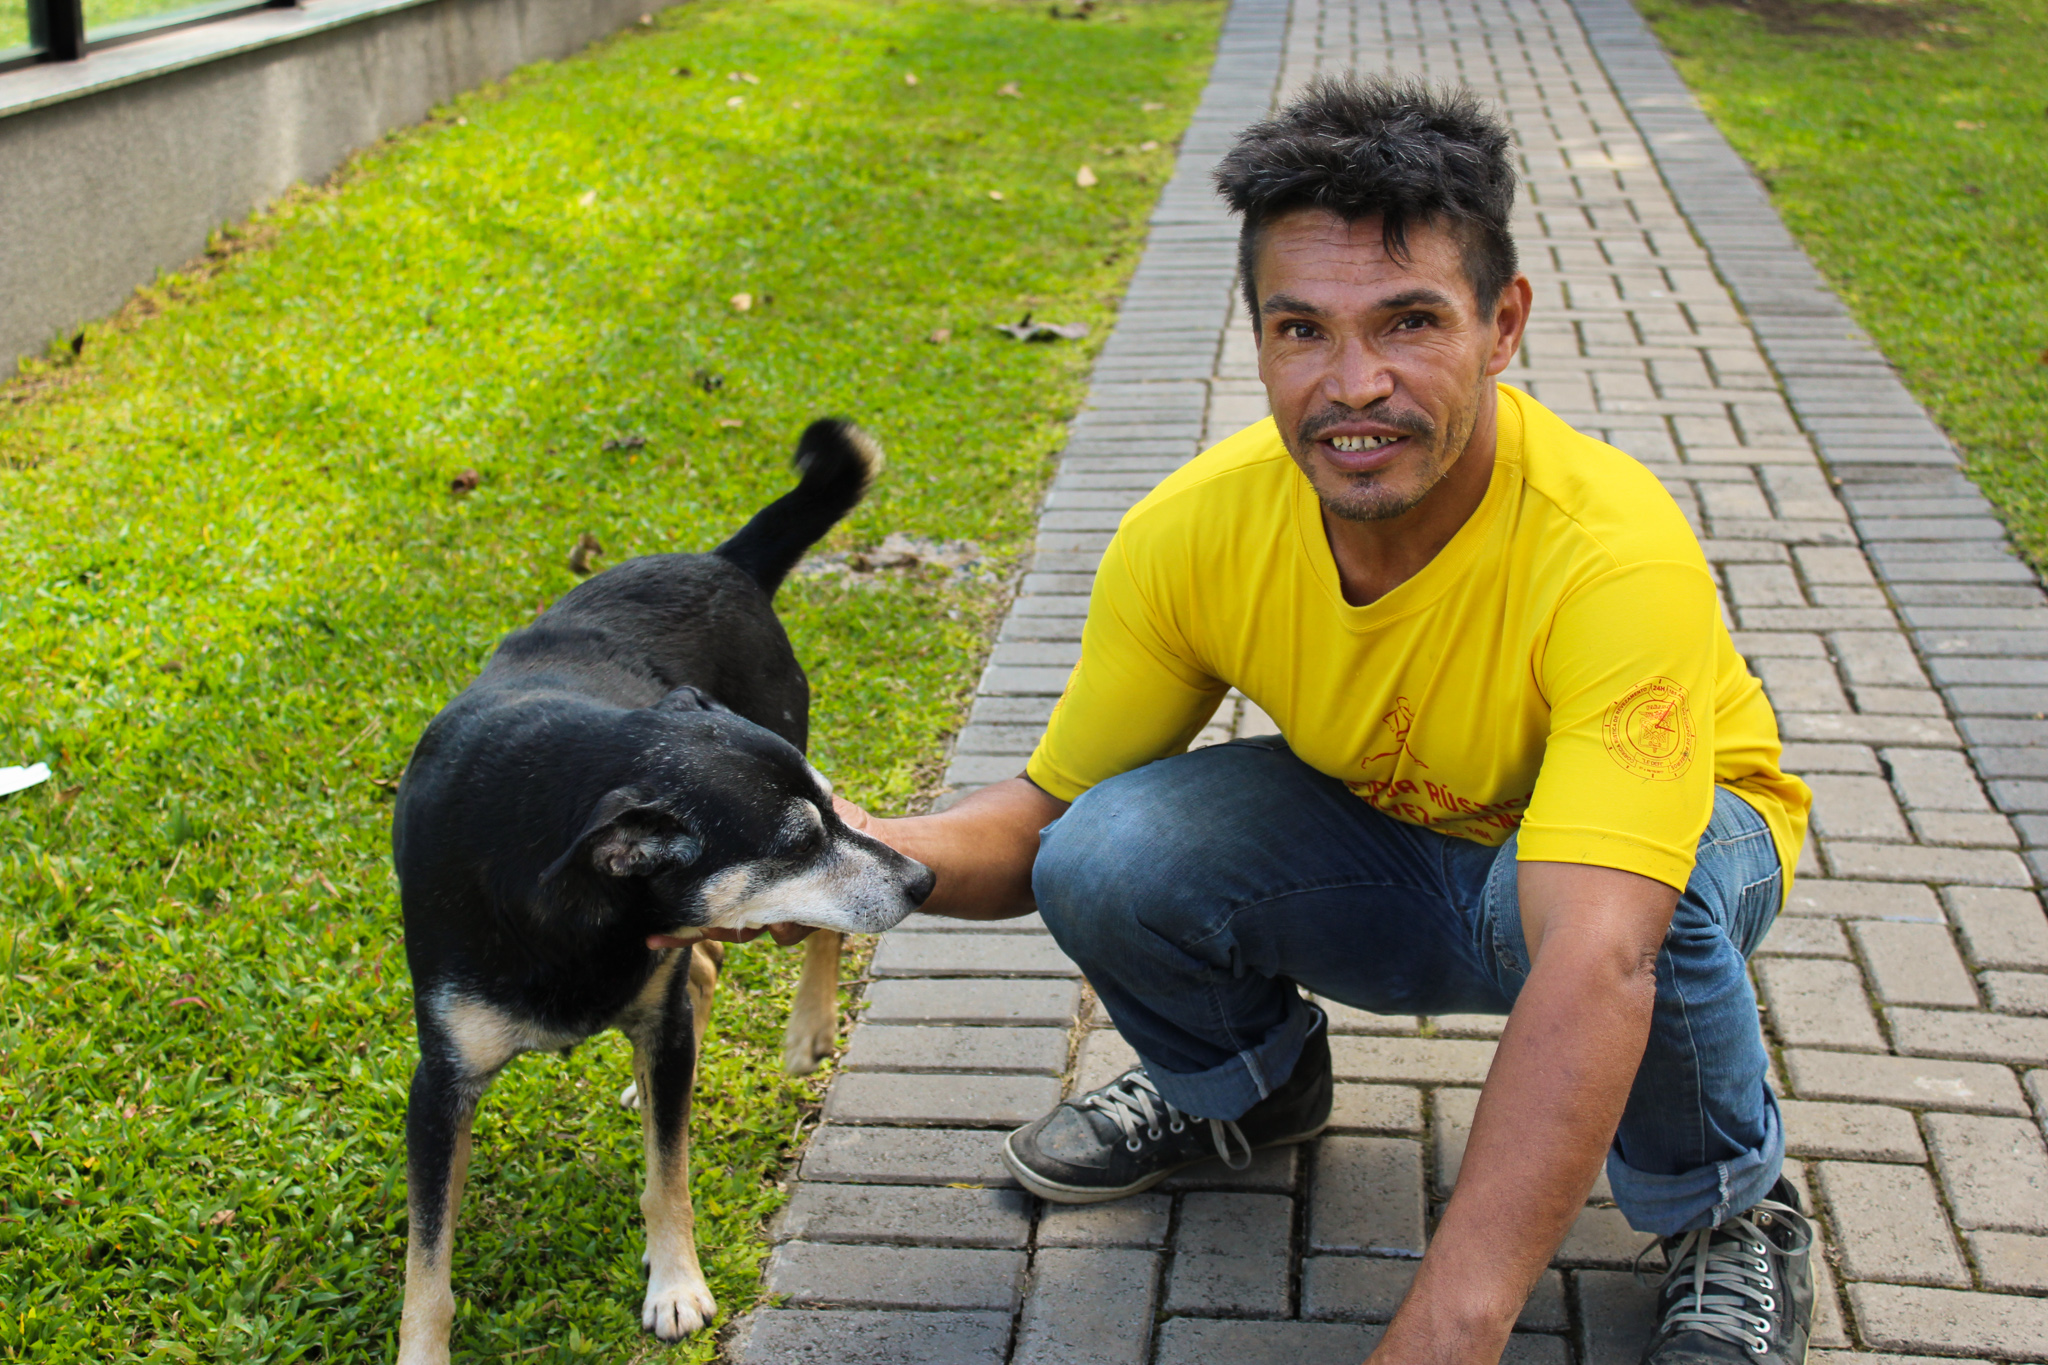 Dogs act as daily company to waste pickers in Curitiba